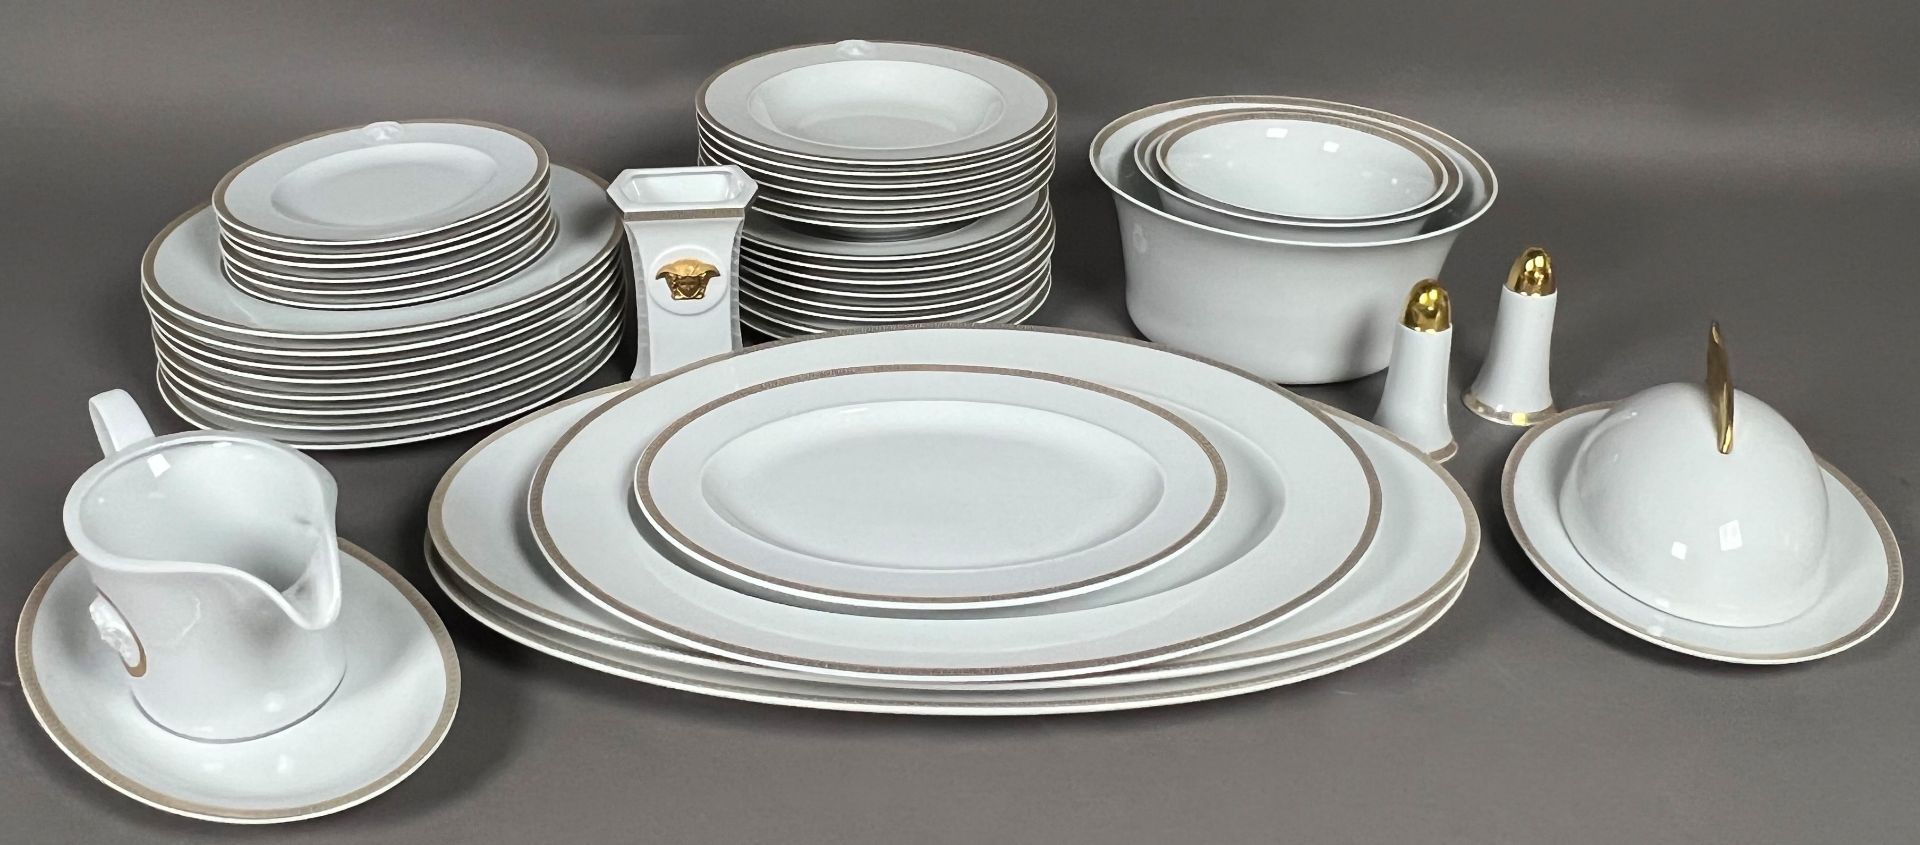 VERSACE by ROSENTHAL. 41-piece dinner service. Icarus. "Medallion Meandre D'Or".